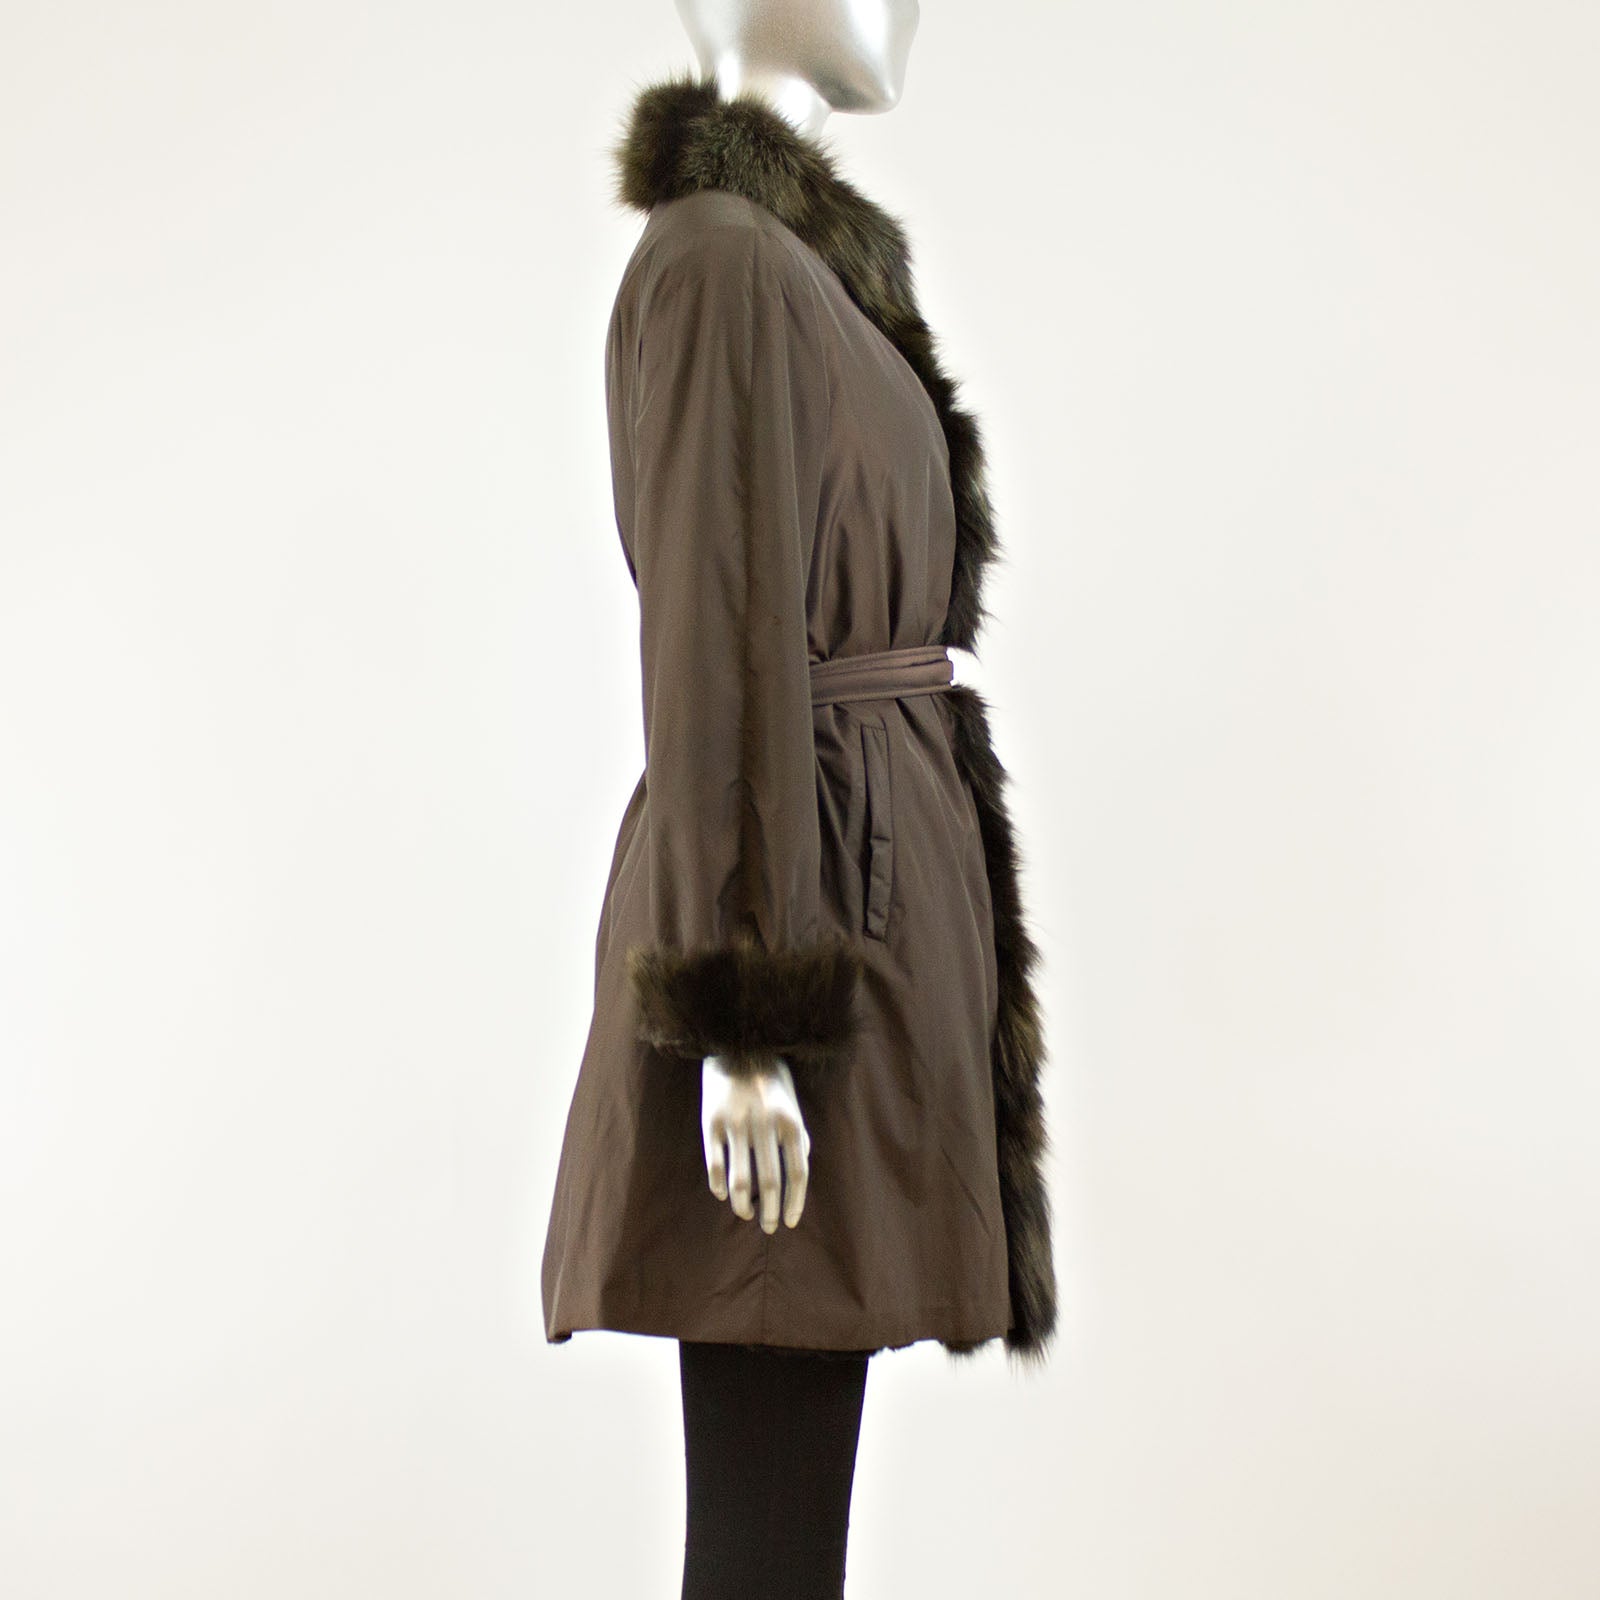 Chewy V Aspen Fur Coat: Tan Brown – Barks First Avenue